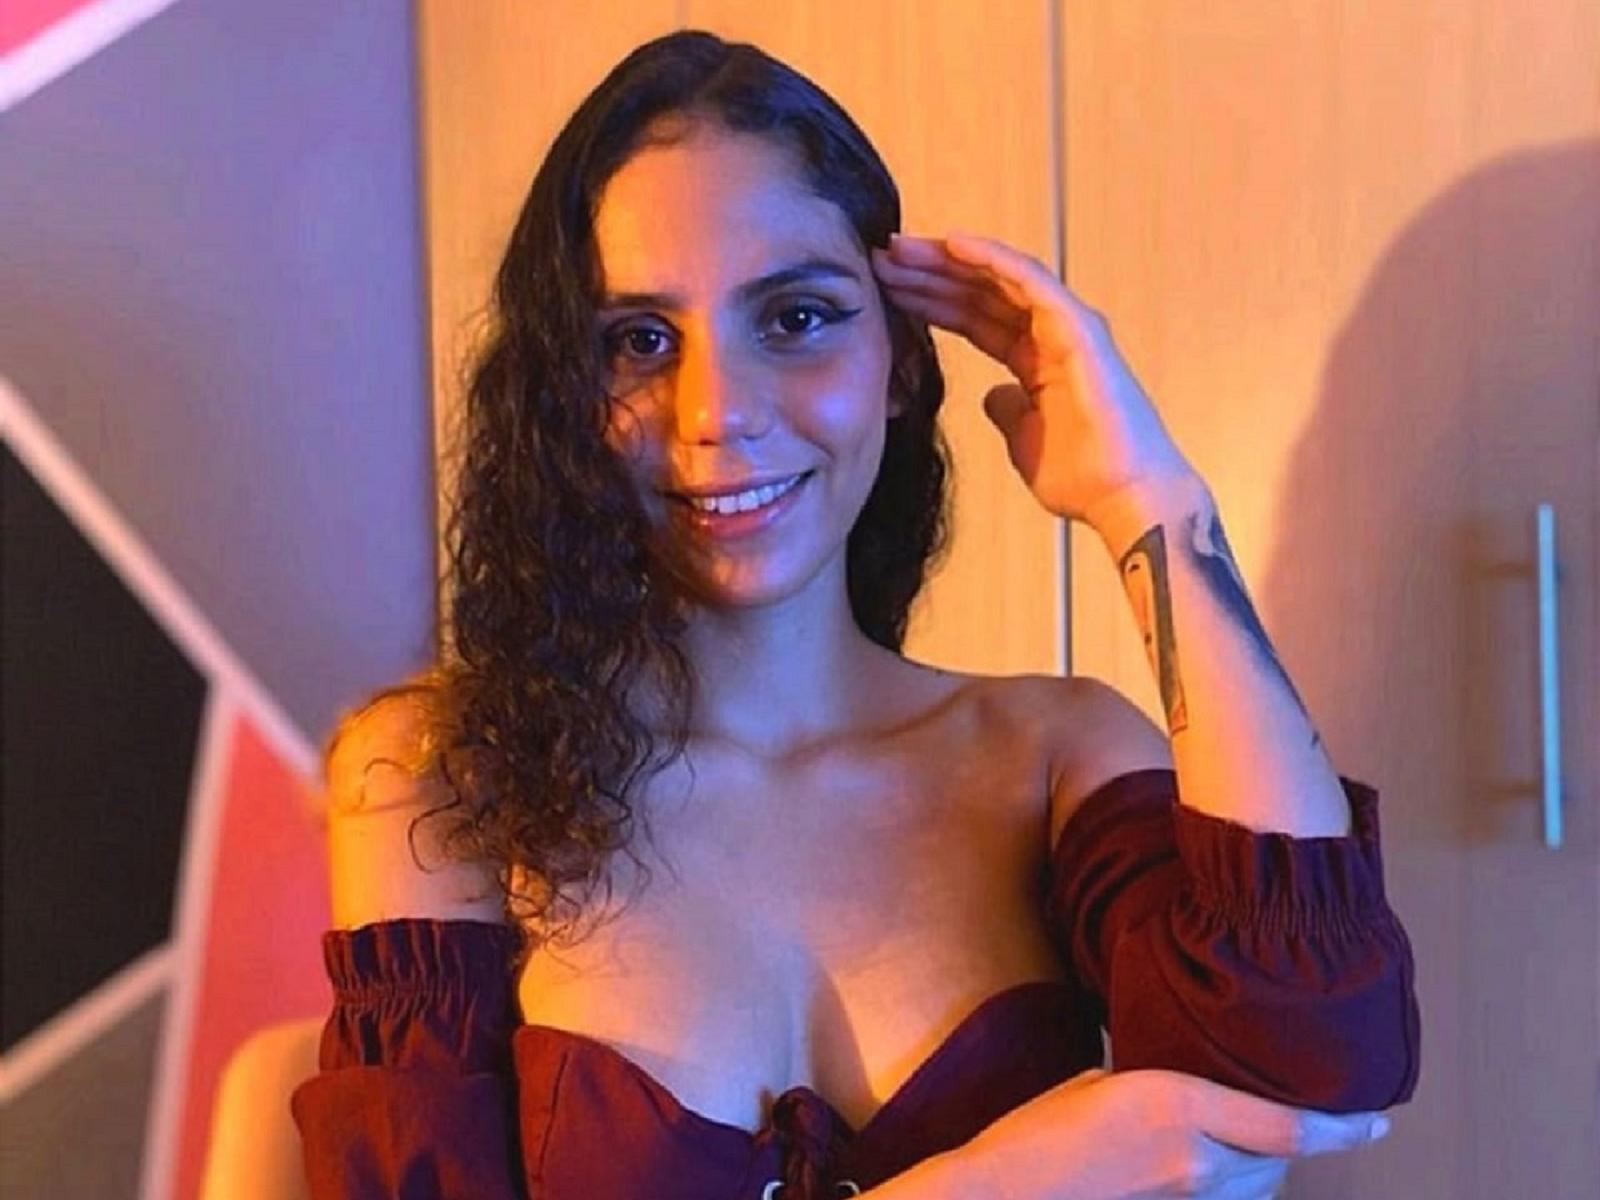 private sex cam Melodysweetys